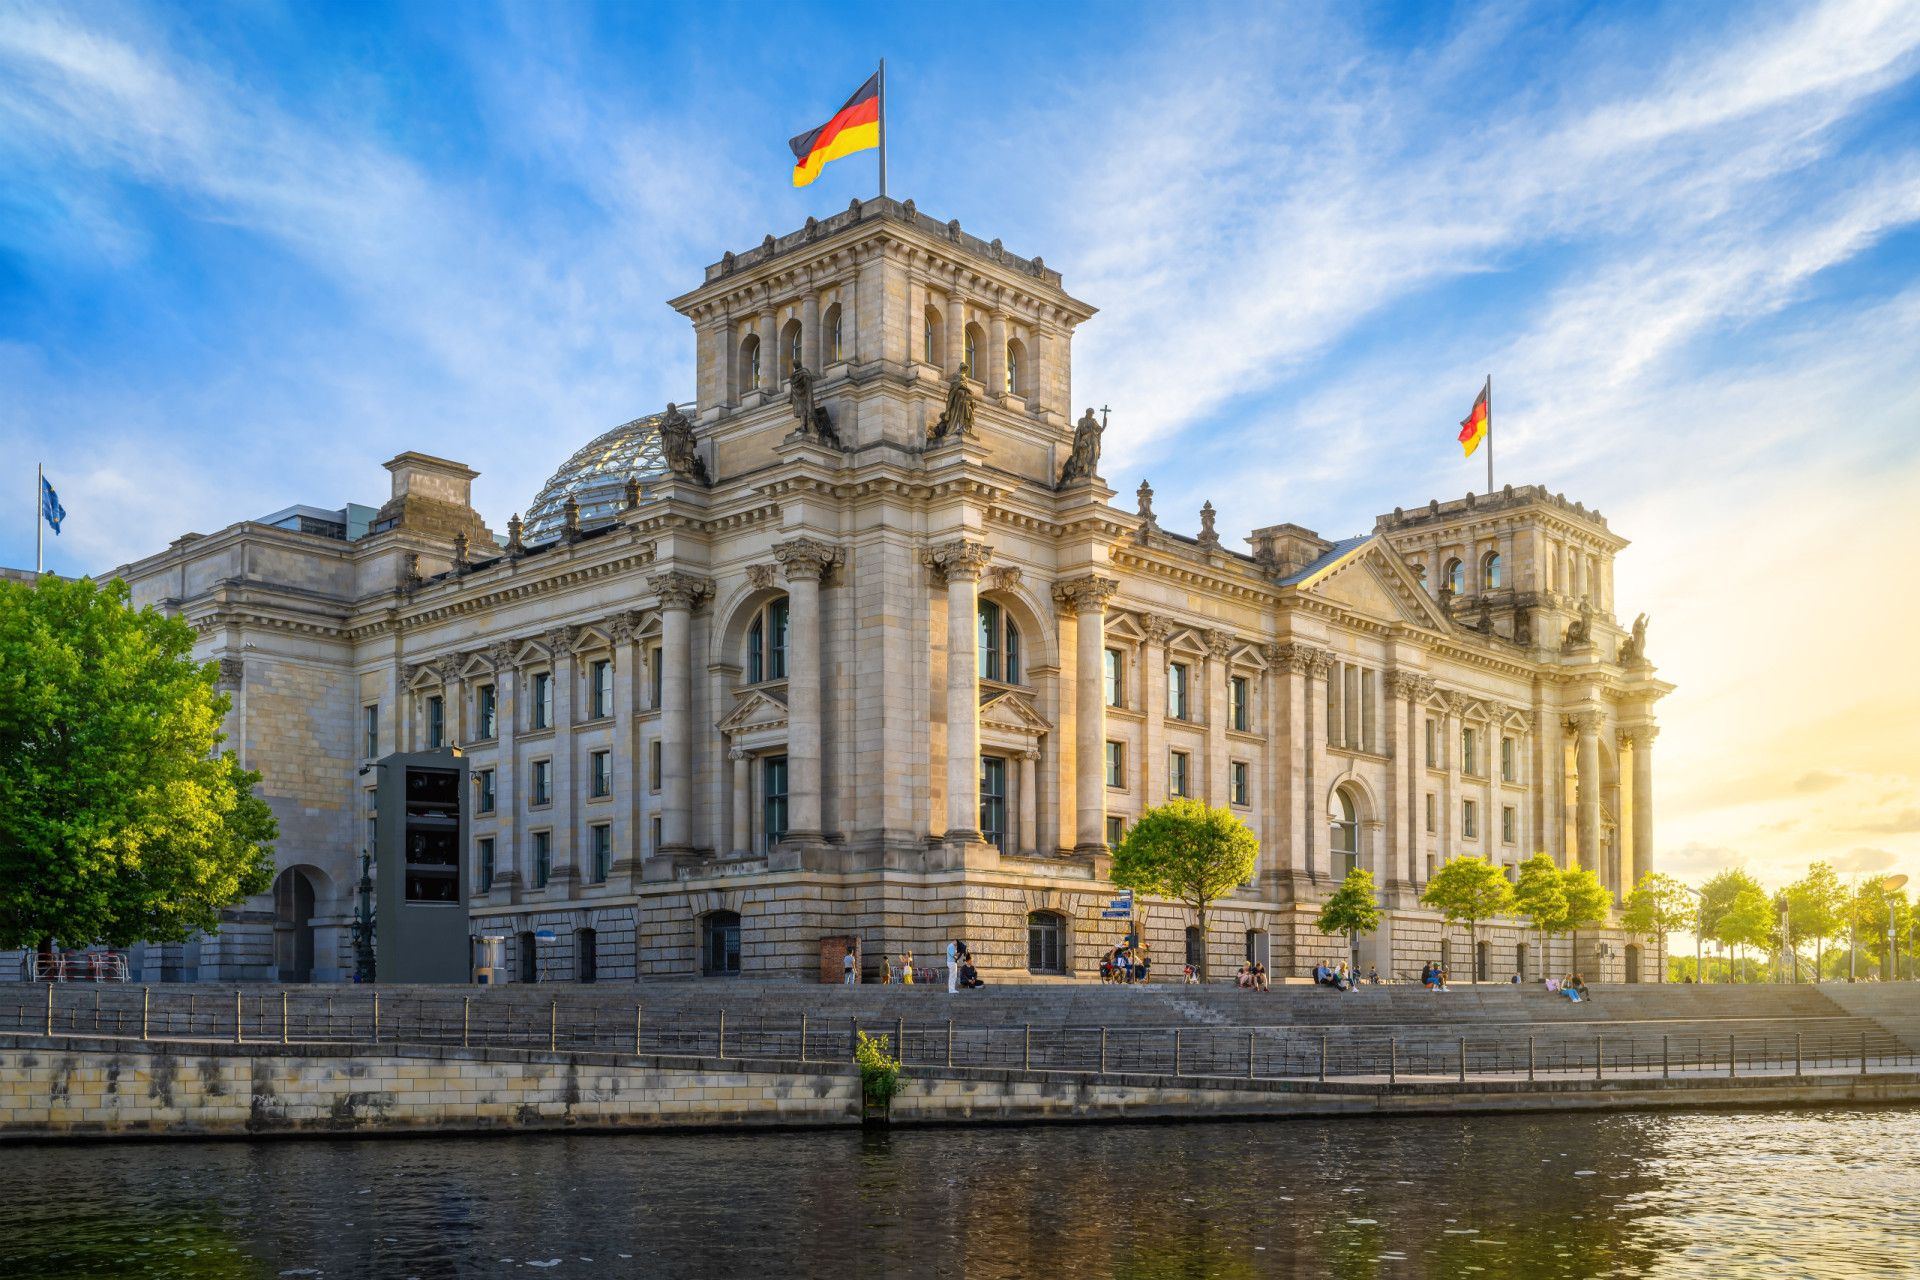 <p><span>Thieves often target tourists visiting the Reichstag Building, so keep your valuables safe when waiting in line or moving through crowds.</span></p><p>You may also like:<a href="https://www.starsinsider.com/n/389220?utm_source=msn.com&utm_medium=display&utm_campaign=referral_description&utm_content=717448en-us"> The best and worst airports of 2019</a></p>